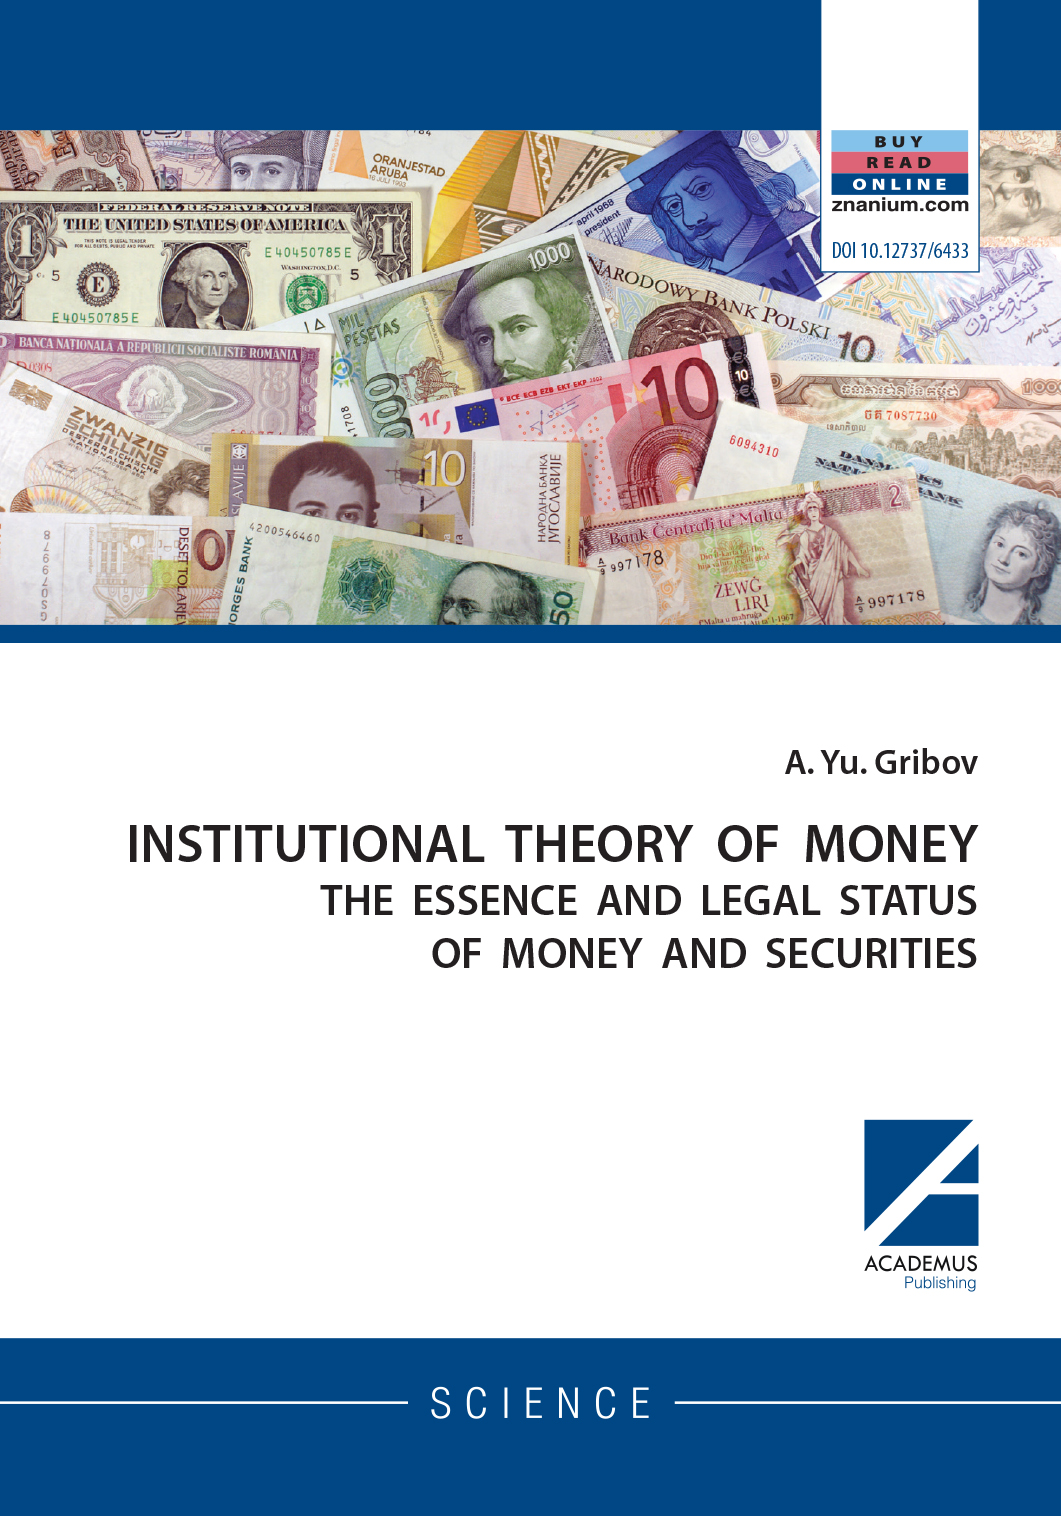                         INSTITUTIONAL THEORY OF MONEY: The essence and legal status of money and securities
            